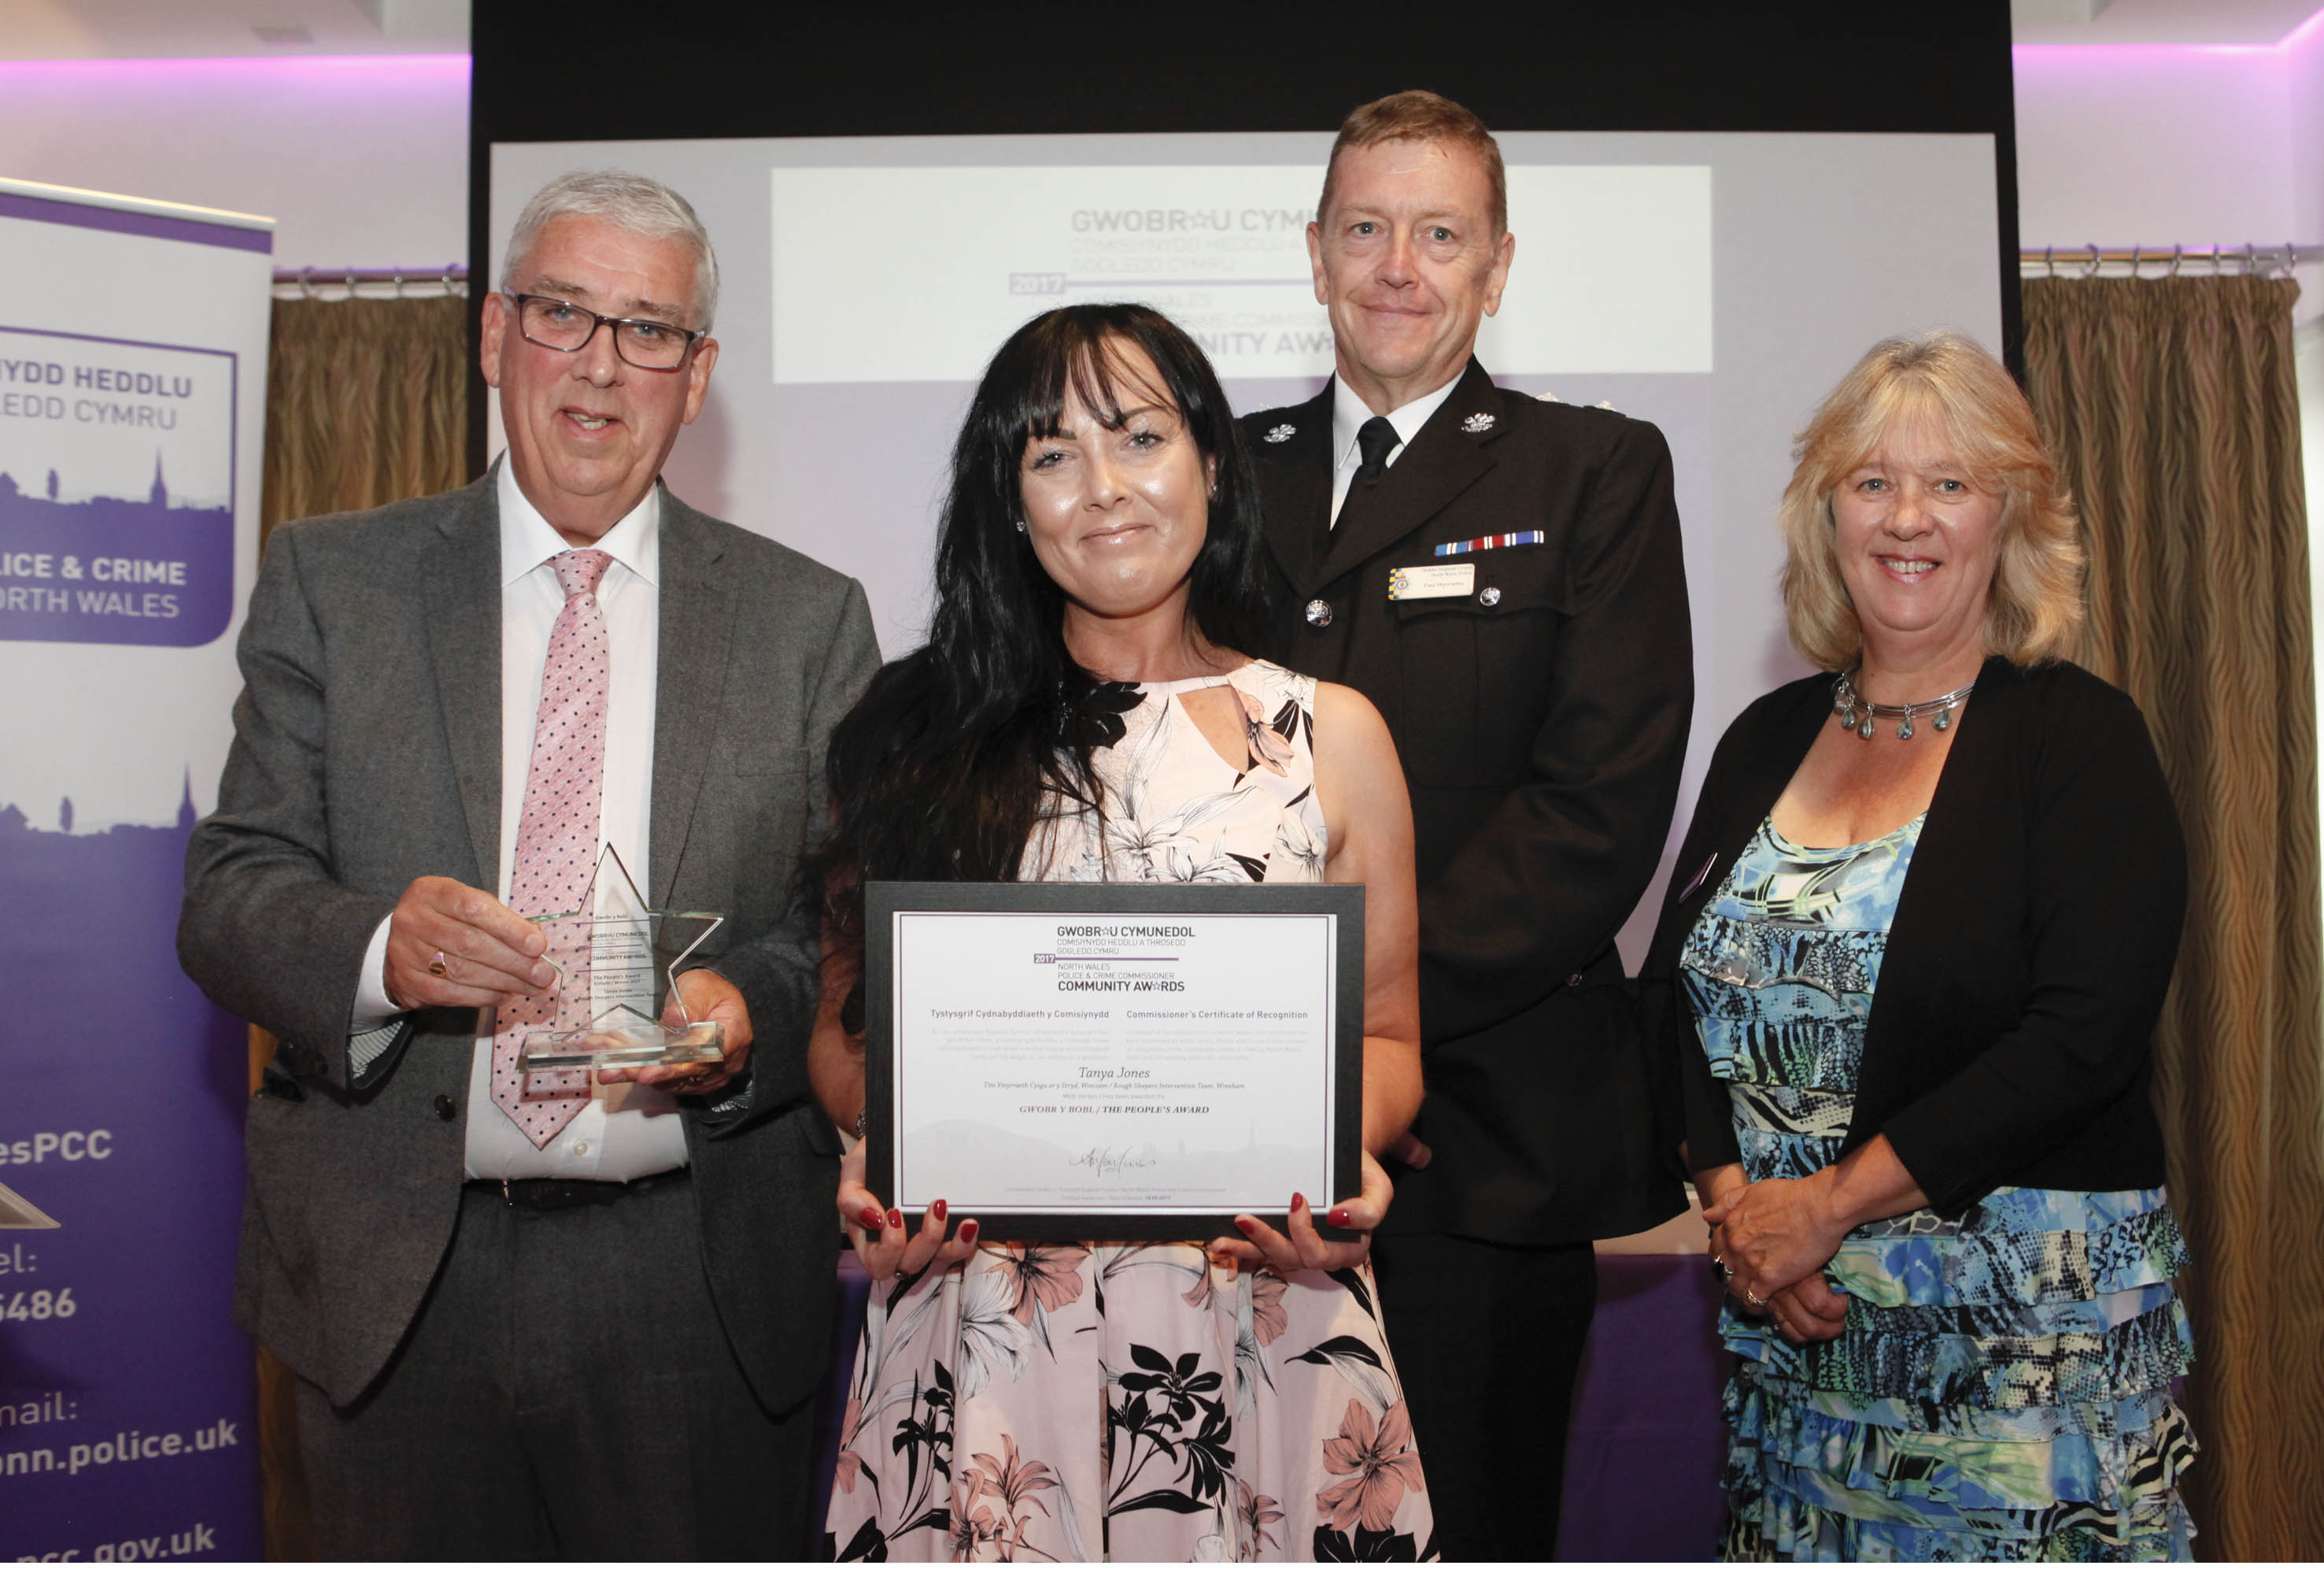 Tanya honoured for selfless work with homeless people